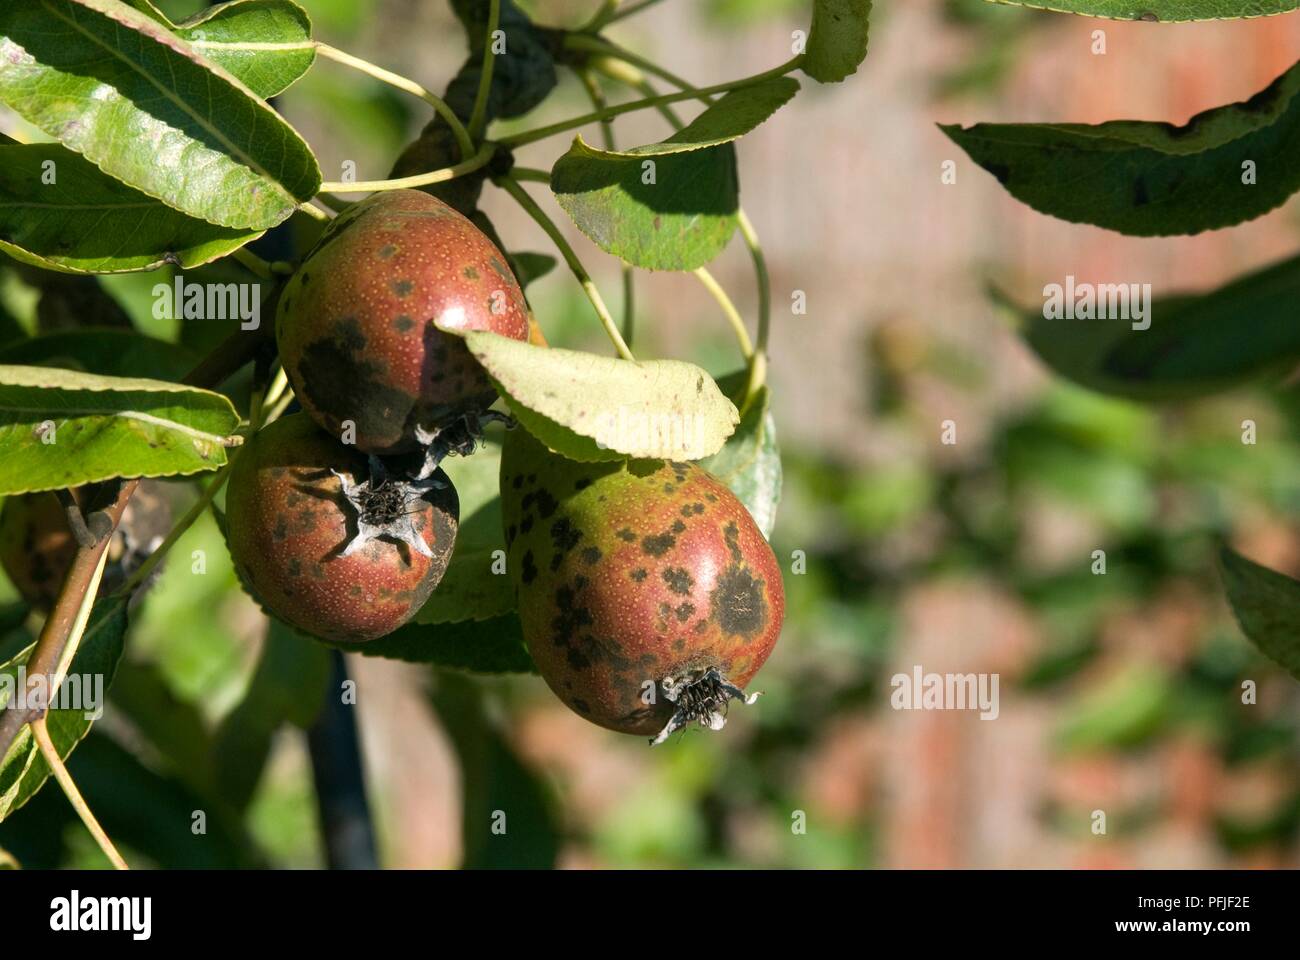 Pears infected with pear scab, close-up Stock Photo